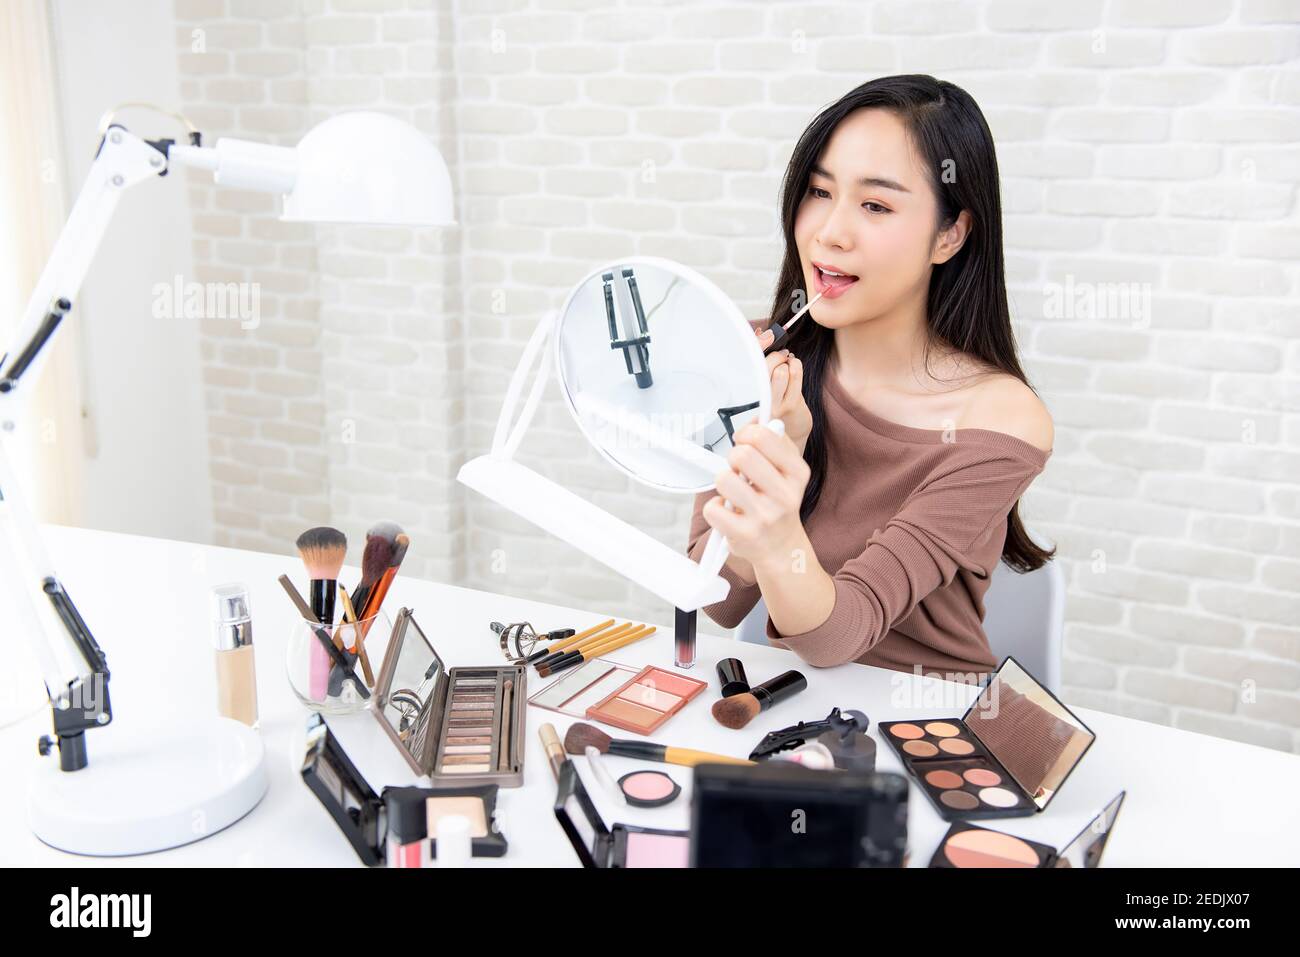 Young beautiful Asian woman professional beauty vlogger or blogger applying lipstick cream to her mouth doing cosmetic makeup tutorial Stock Photo